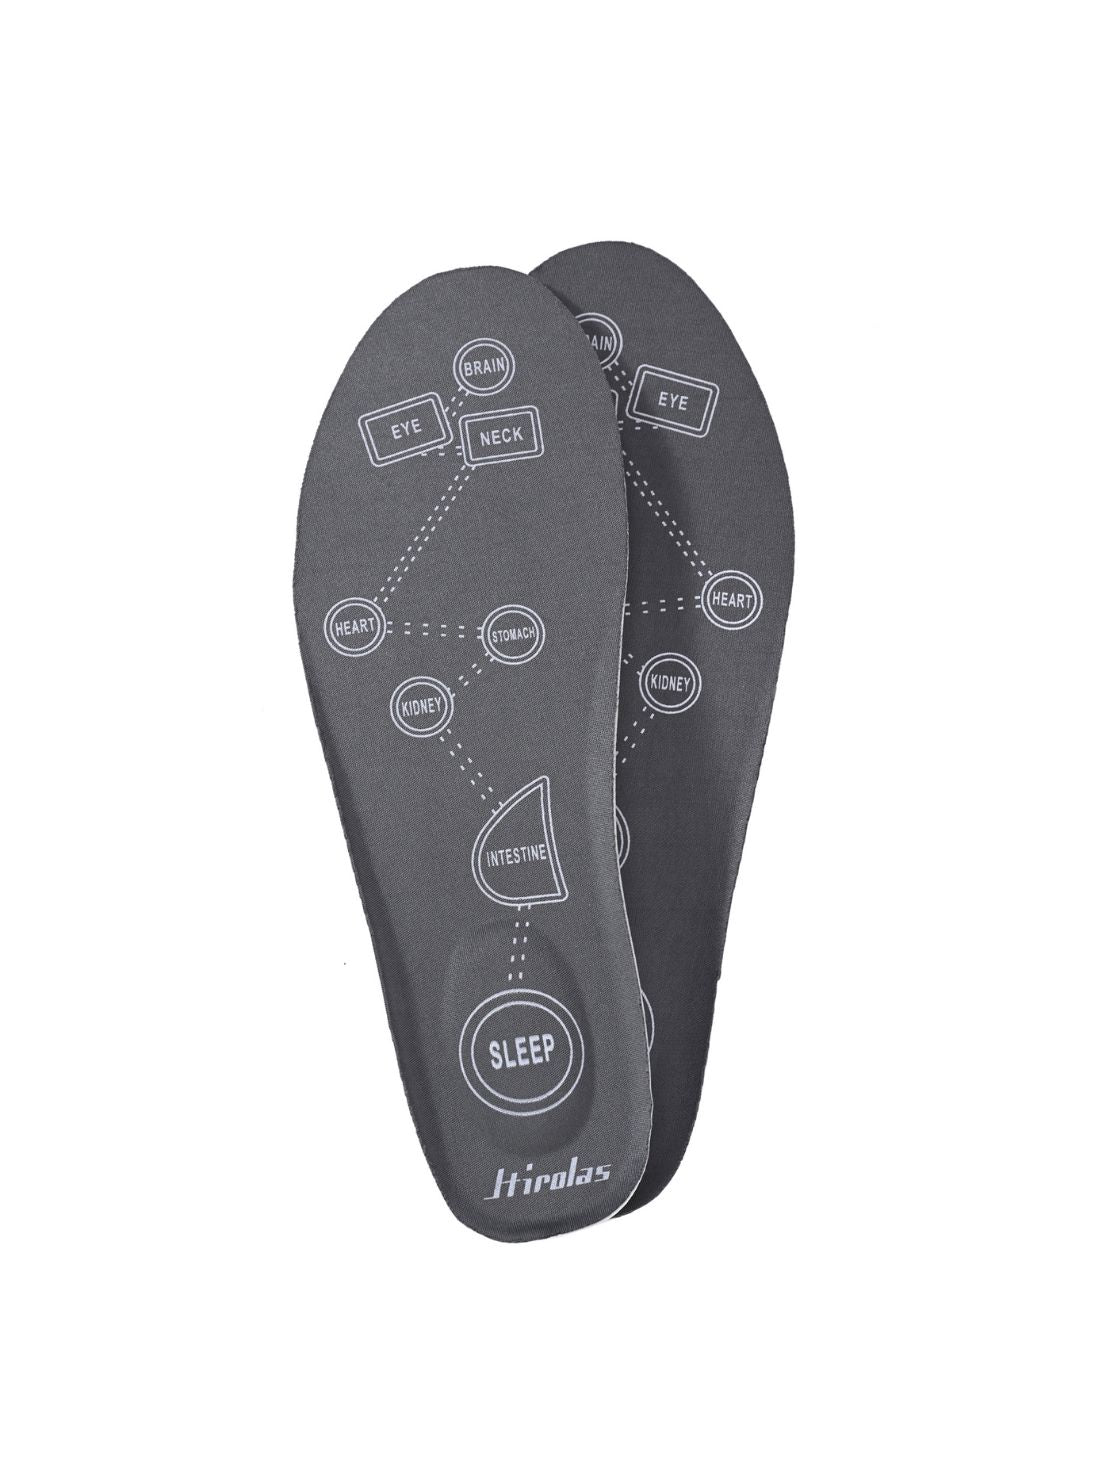 Hirolas Grey PU Insole foam Shoe Heels for all Shoes makes shoes Super Soft & Comfortable | PU Insoles|Cushioning for Feet Relief, Comfortable Insoles